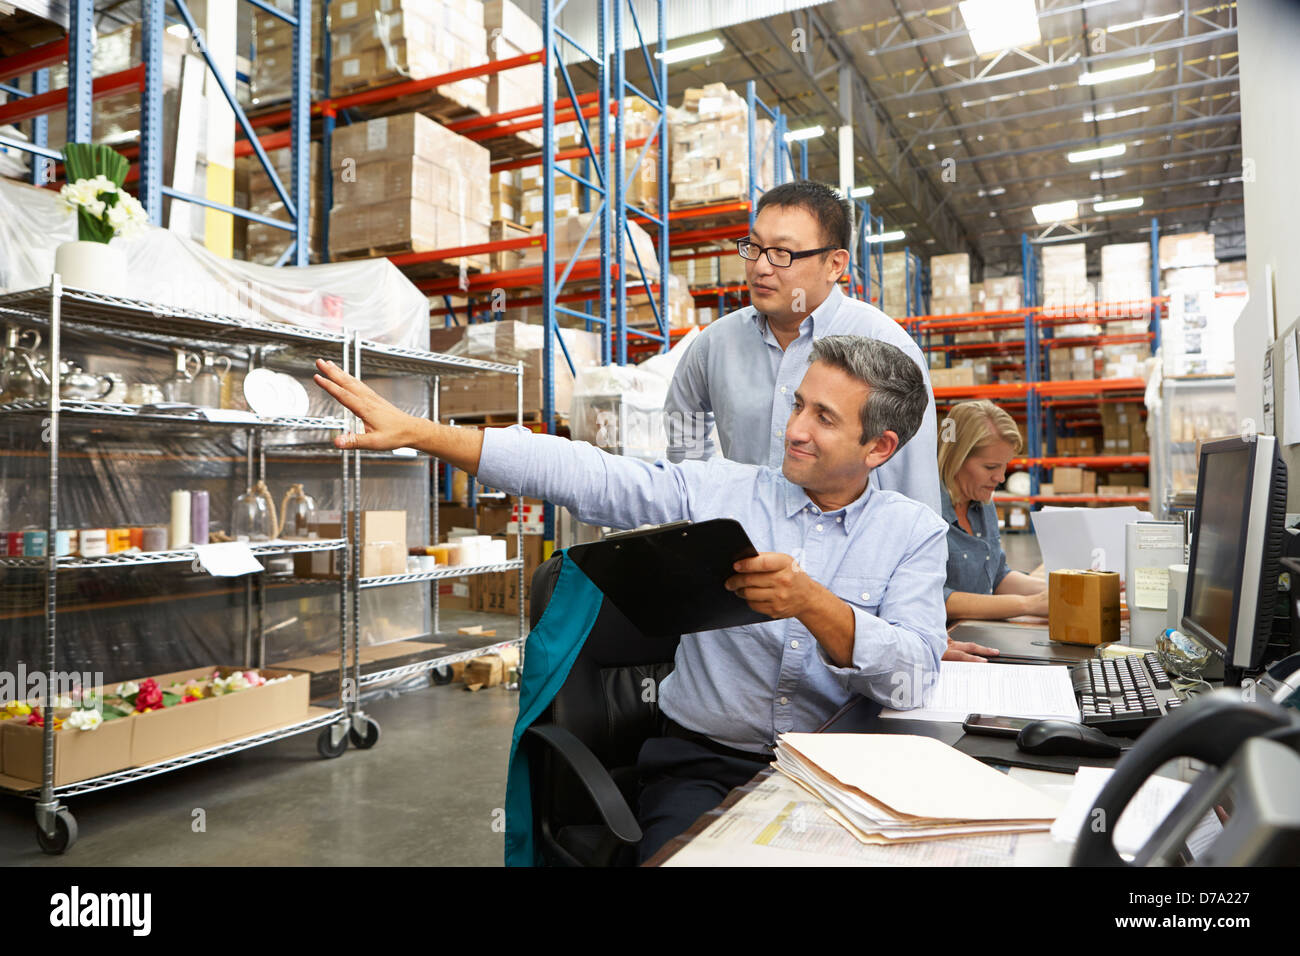 Business Colleagues Working At Desk In Warehouse Stock Photo